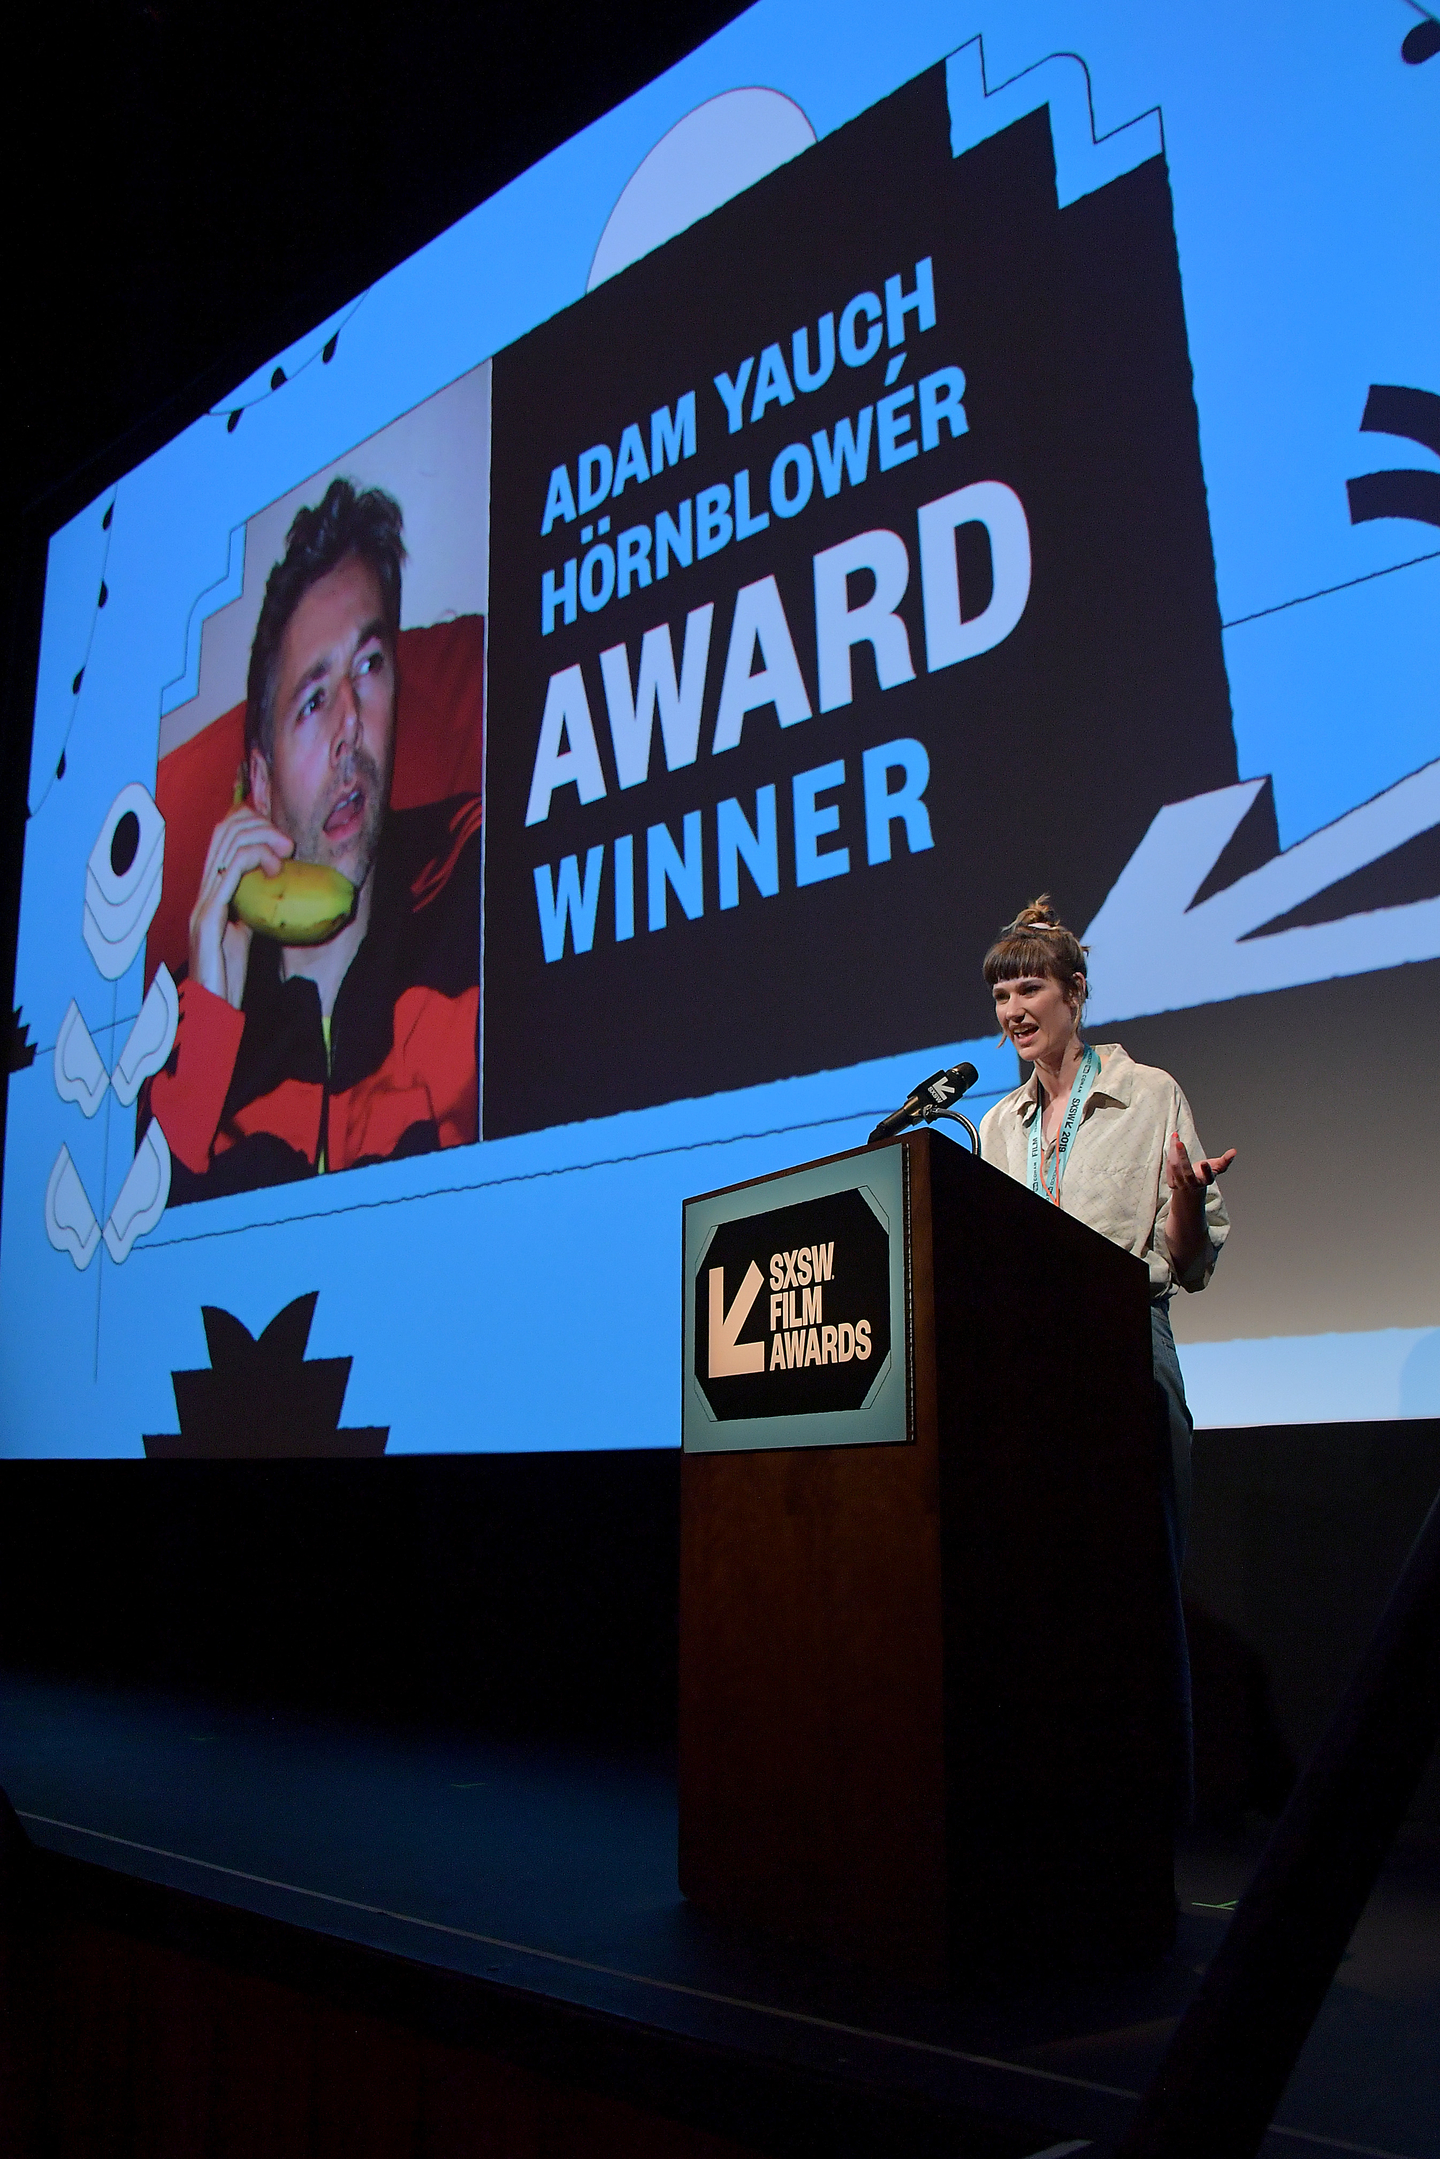 Grace Glowicki accepts the Adam Yauch Hornblower Award for her film Tito at the SXSW Film Awards at the Paramount Theatre.